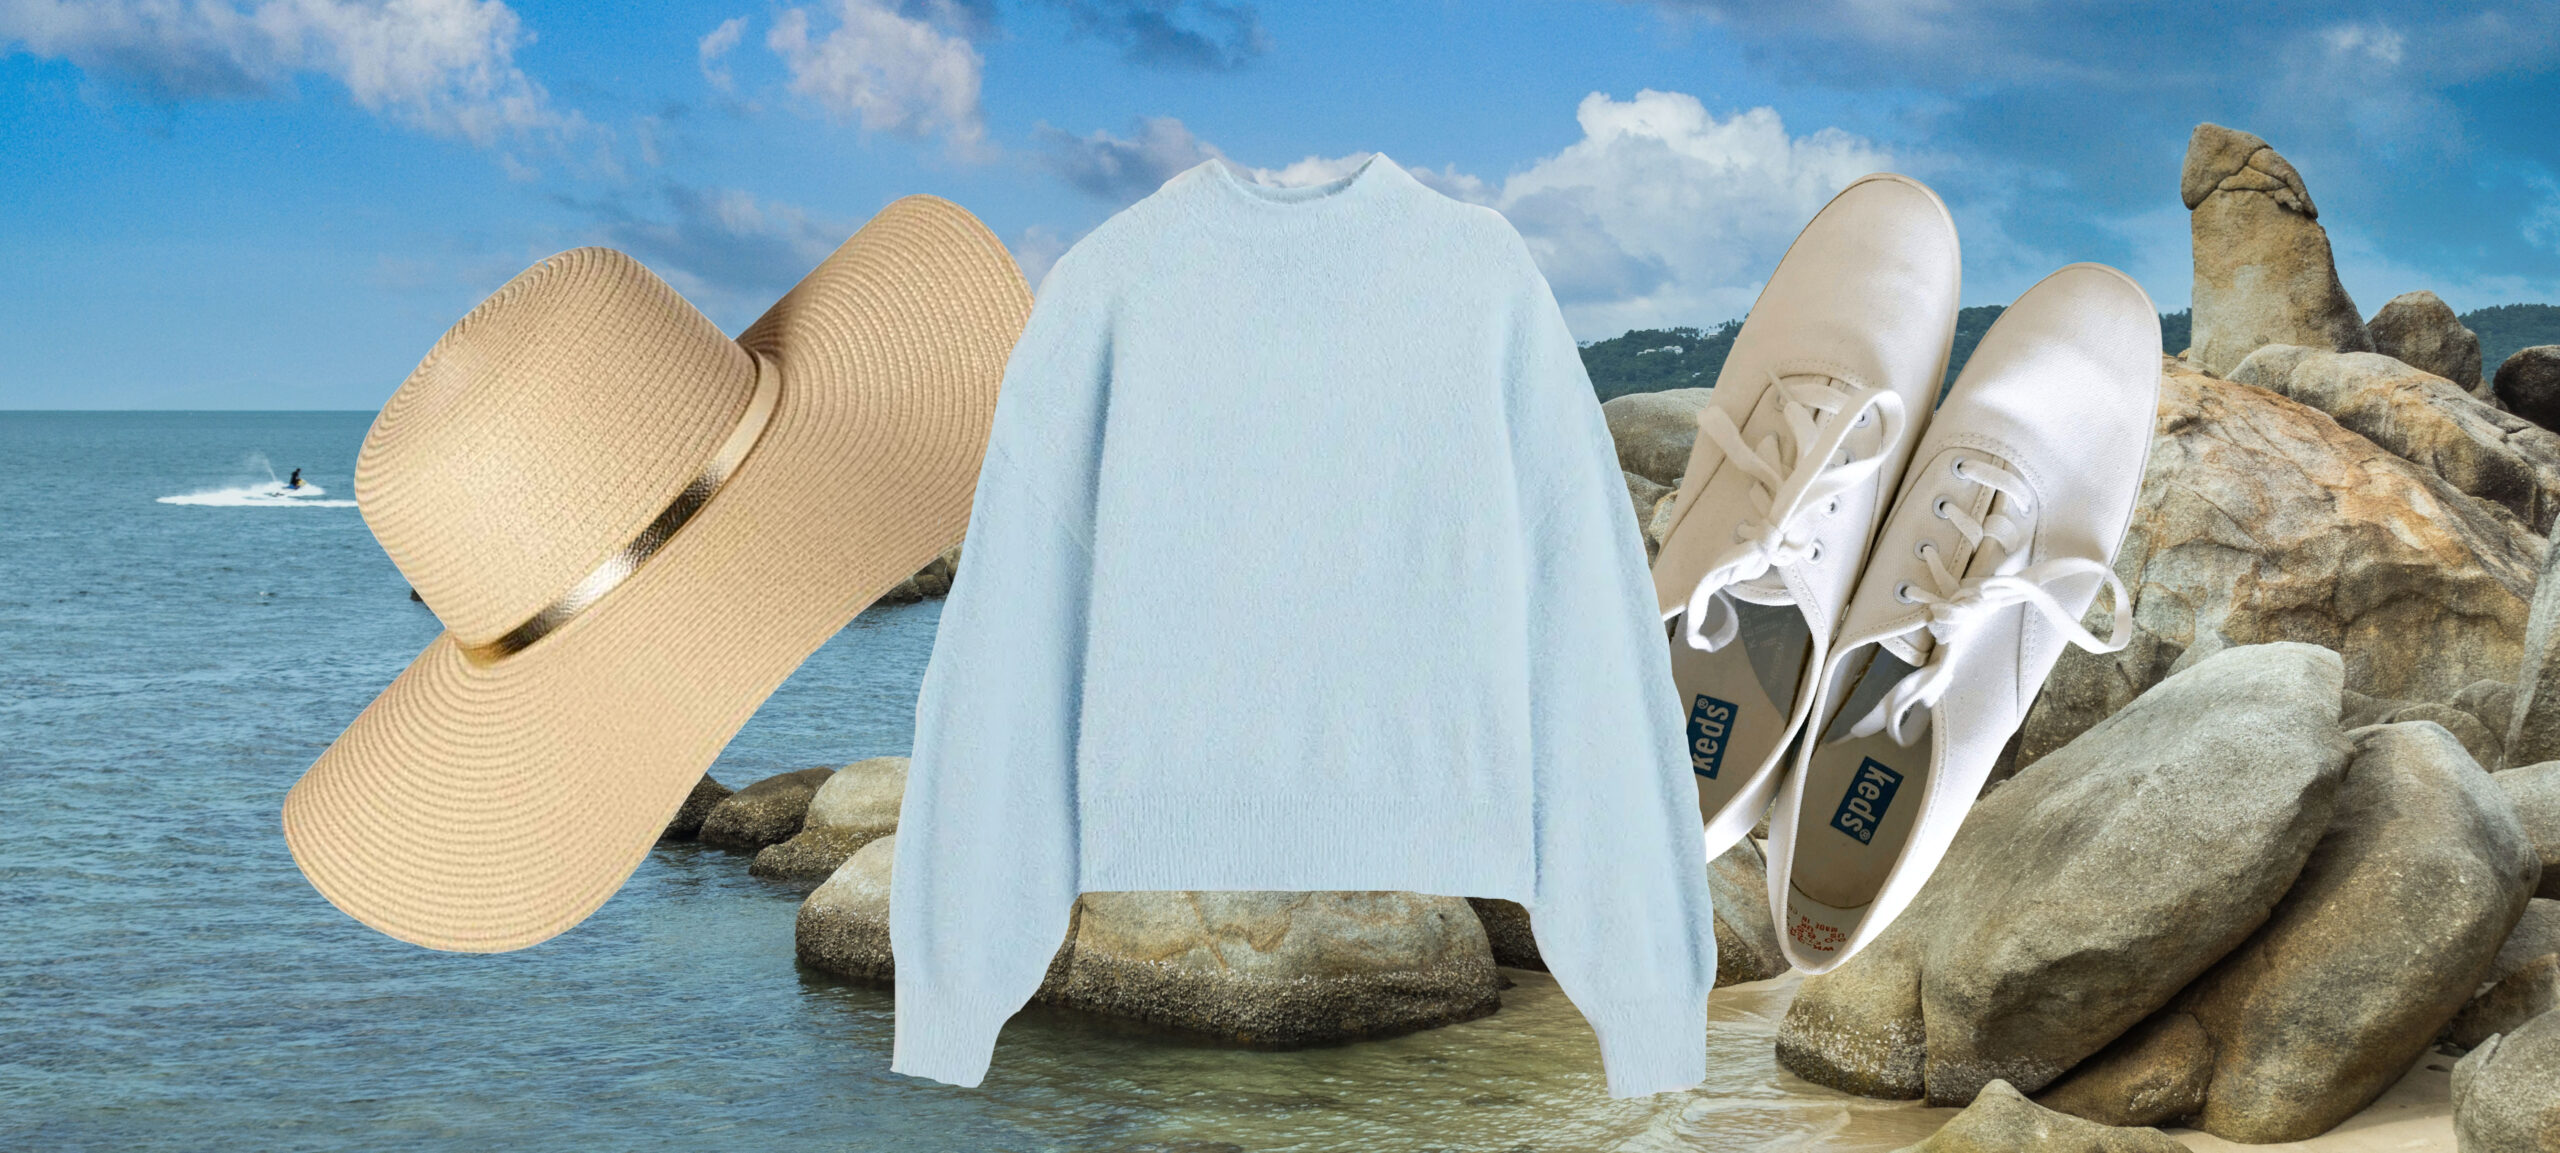 How To Achieve The ‘Coastal Grandmother’ Aesthetic